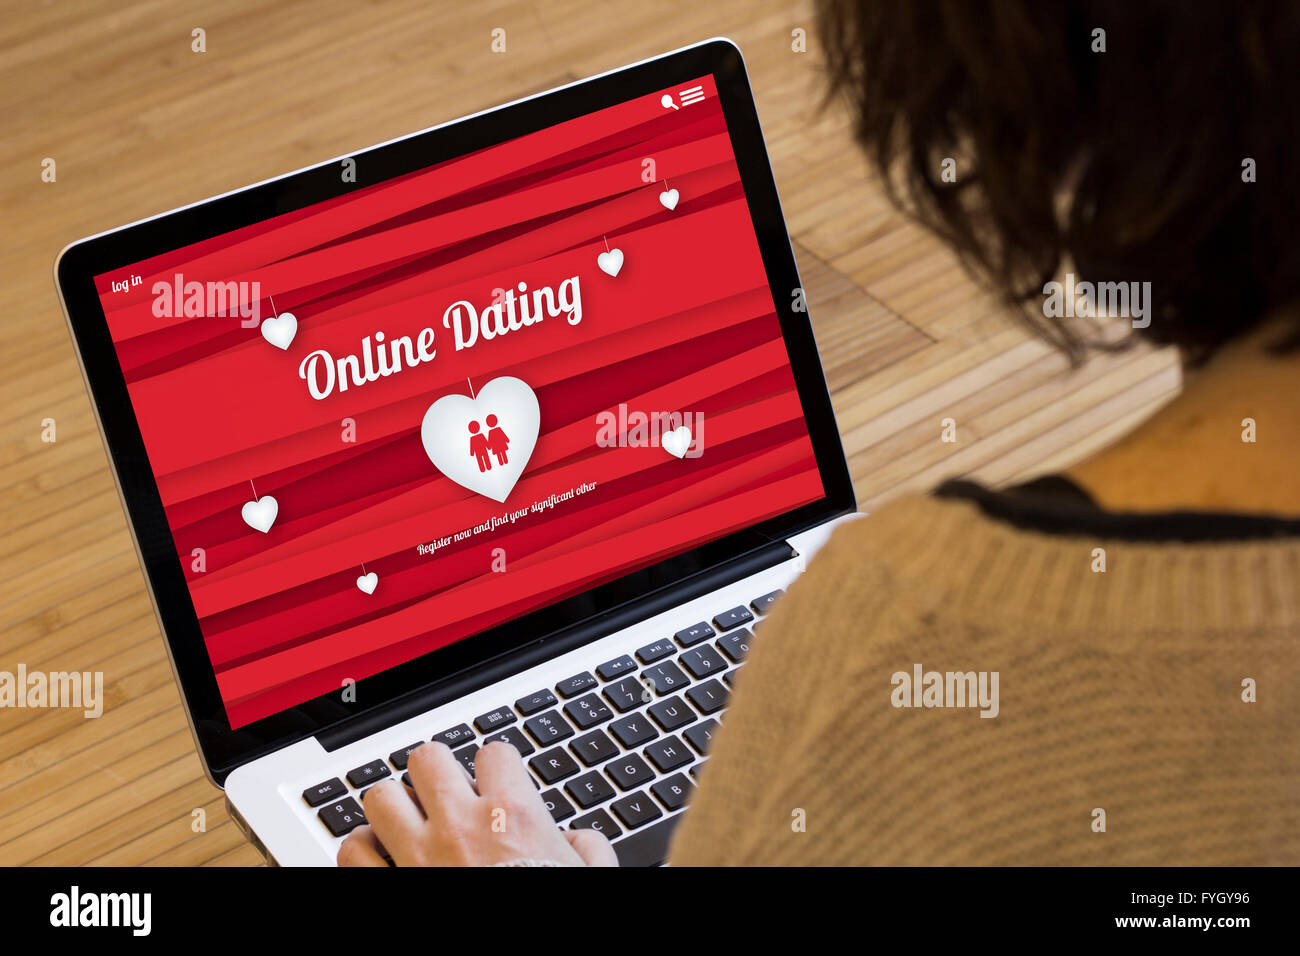 dating online concept: online dating website on a laptop screen. Screen graphics are made up. Stock Photo